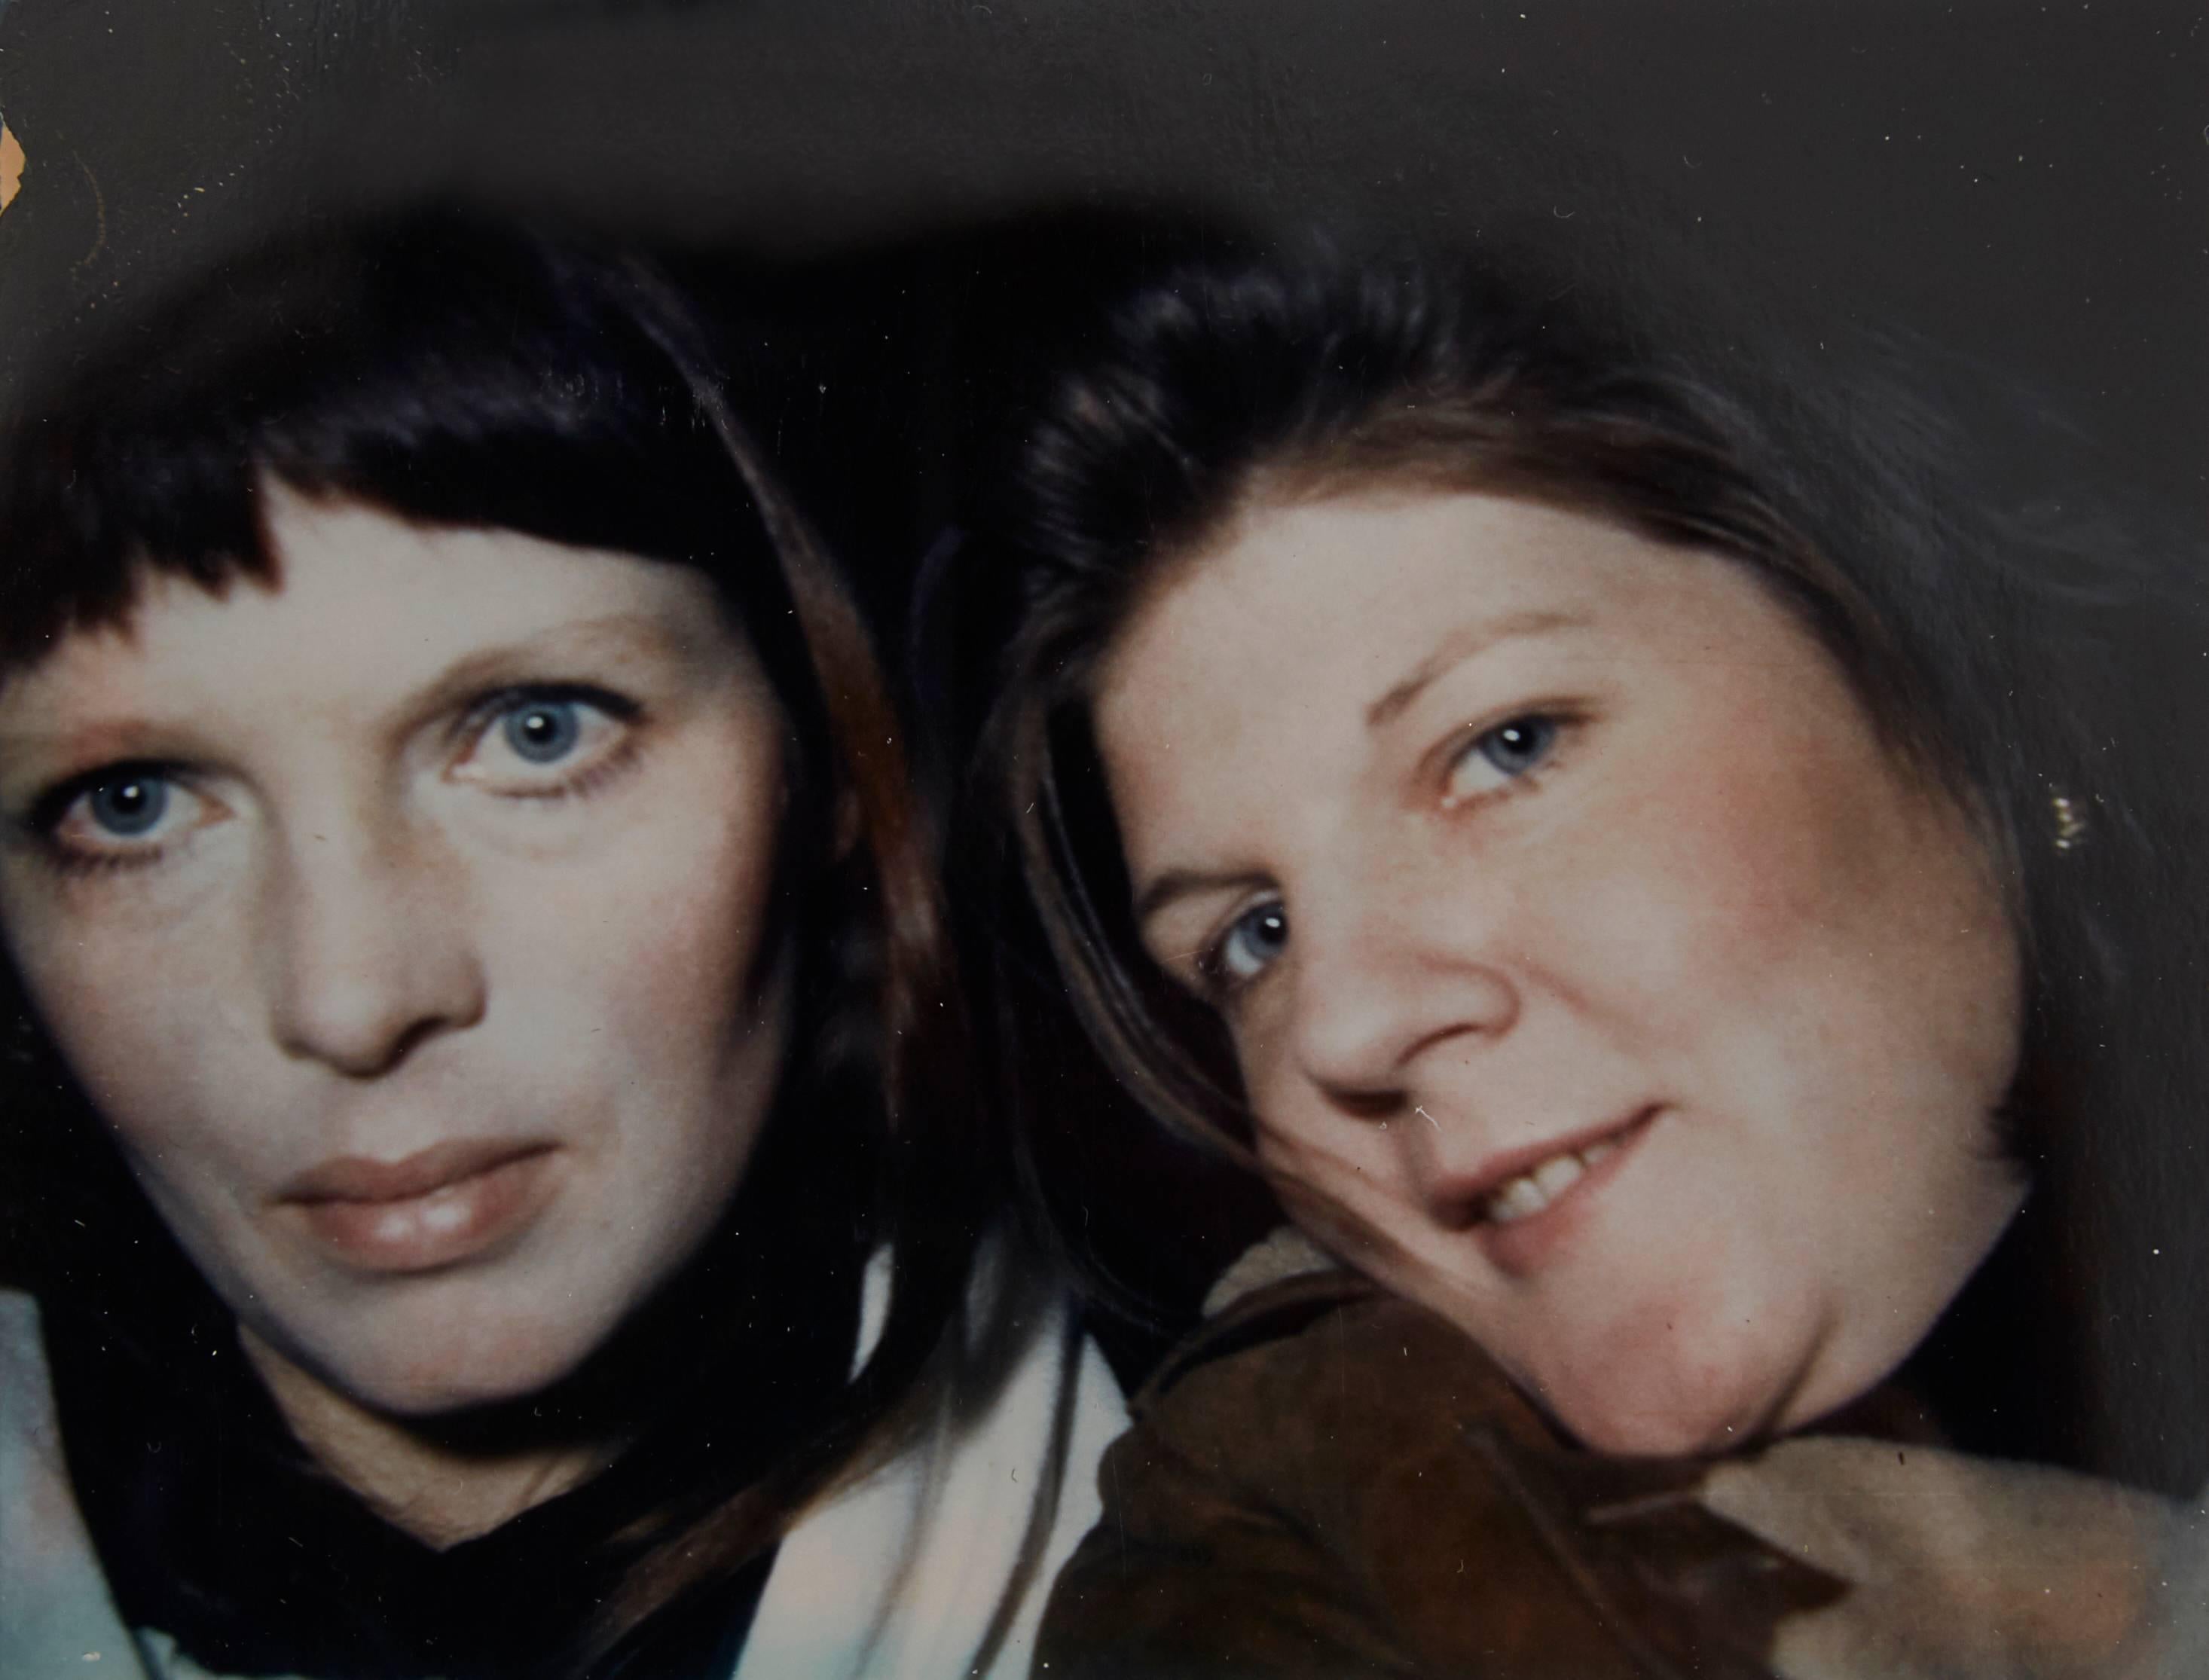 Original polaroid of iconic model and singer Nico and Warhol superstar Brigid Berlin (aka Brigid Polk) taken by Berlin.  Berlin was one of Warhol's closest confidants and prominent member of the Factory.  This polaroid is from her personal